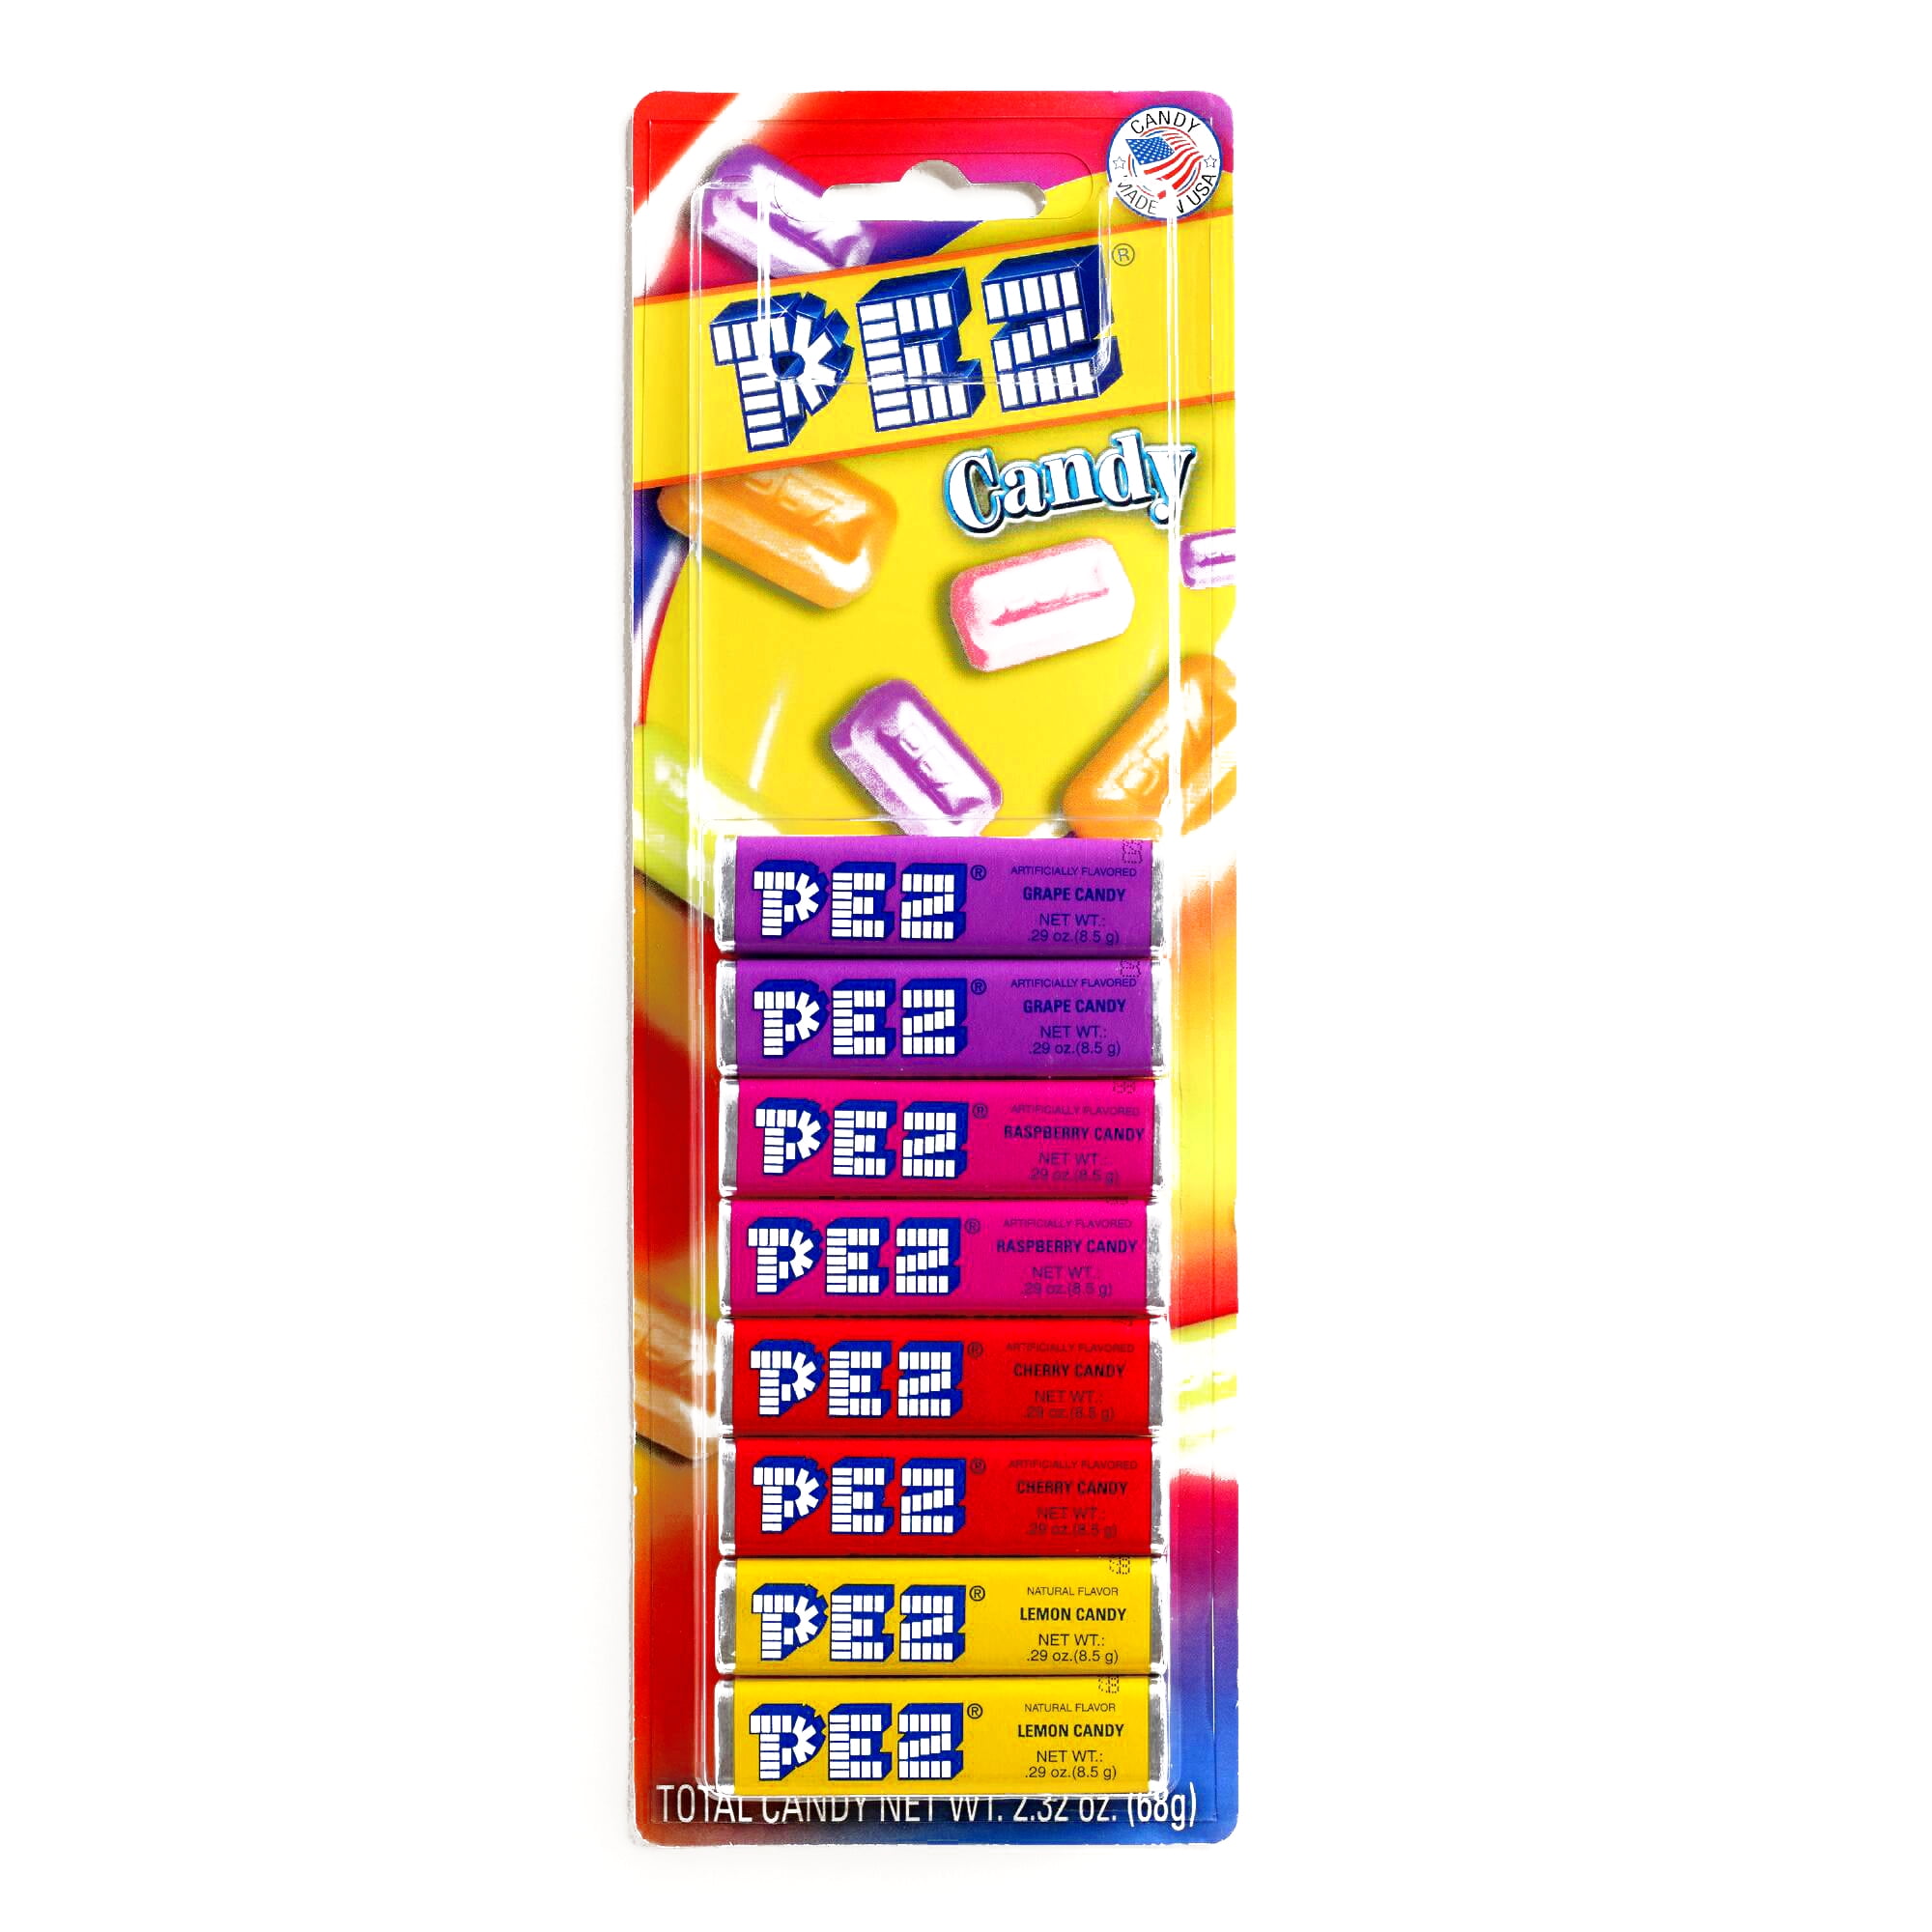 Pez Fruit Refill Candy 8 Pack 	2.9 oz each (2 Items Per Order)